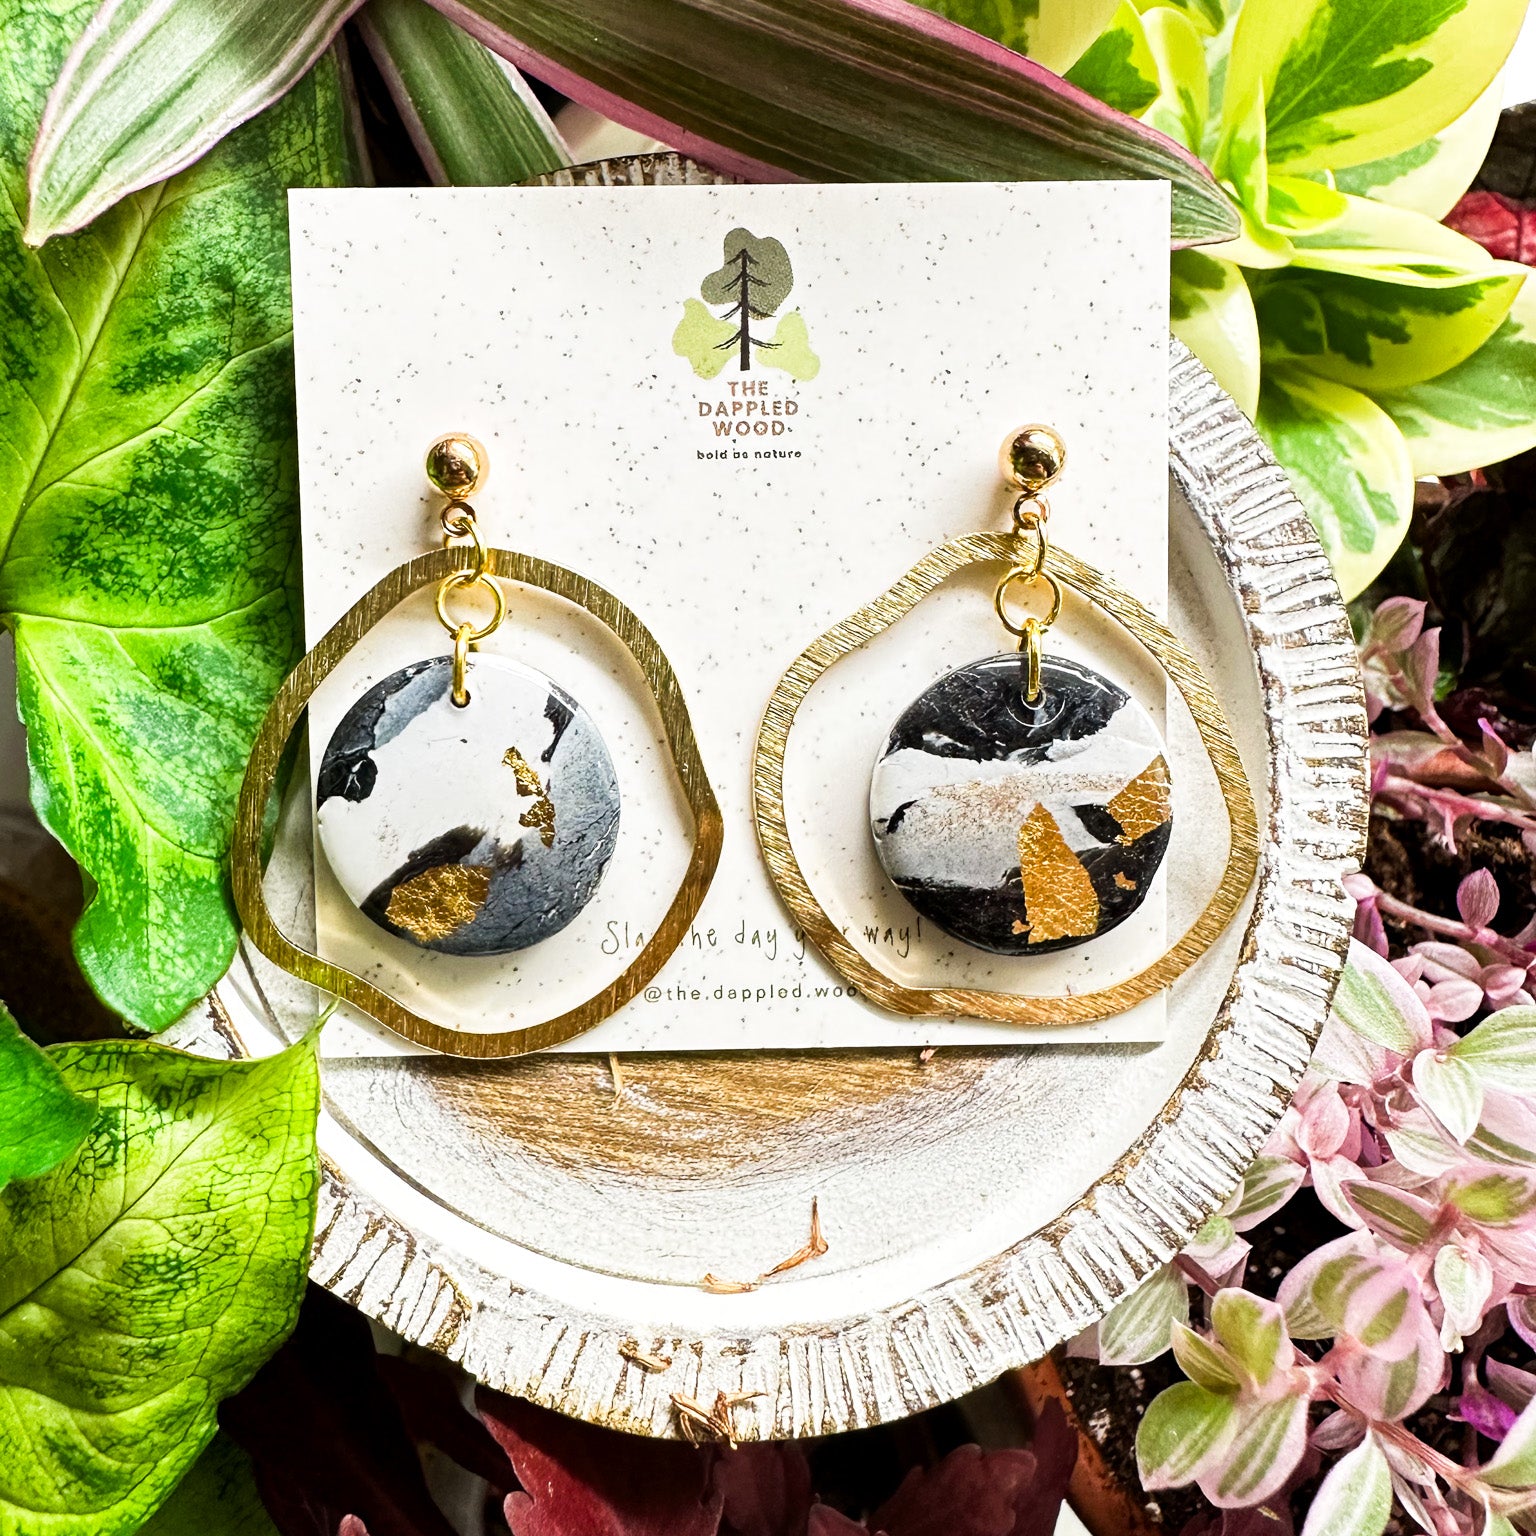 Handcrafted black and white marbled circular polymer clay earrings with gold accents displayed on a speckled card labeled 'The Dappled Wood' surrounded by vibrant indoor plants in shades of green, pink, and purple.